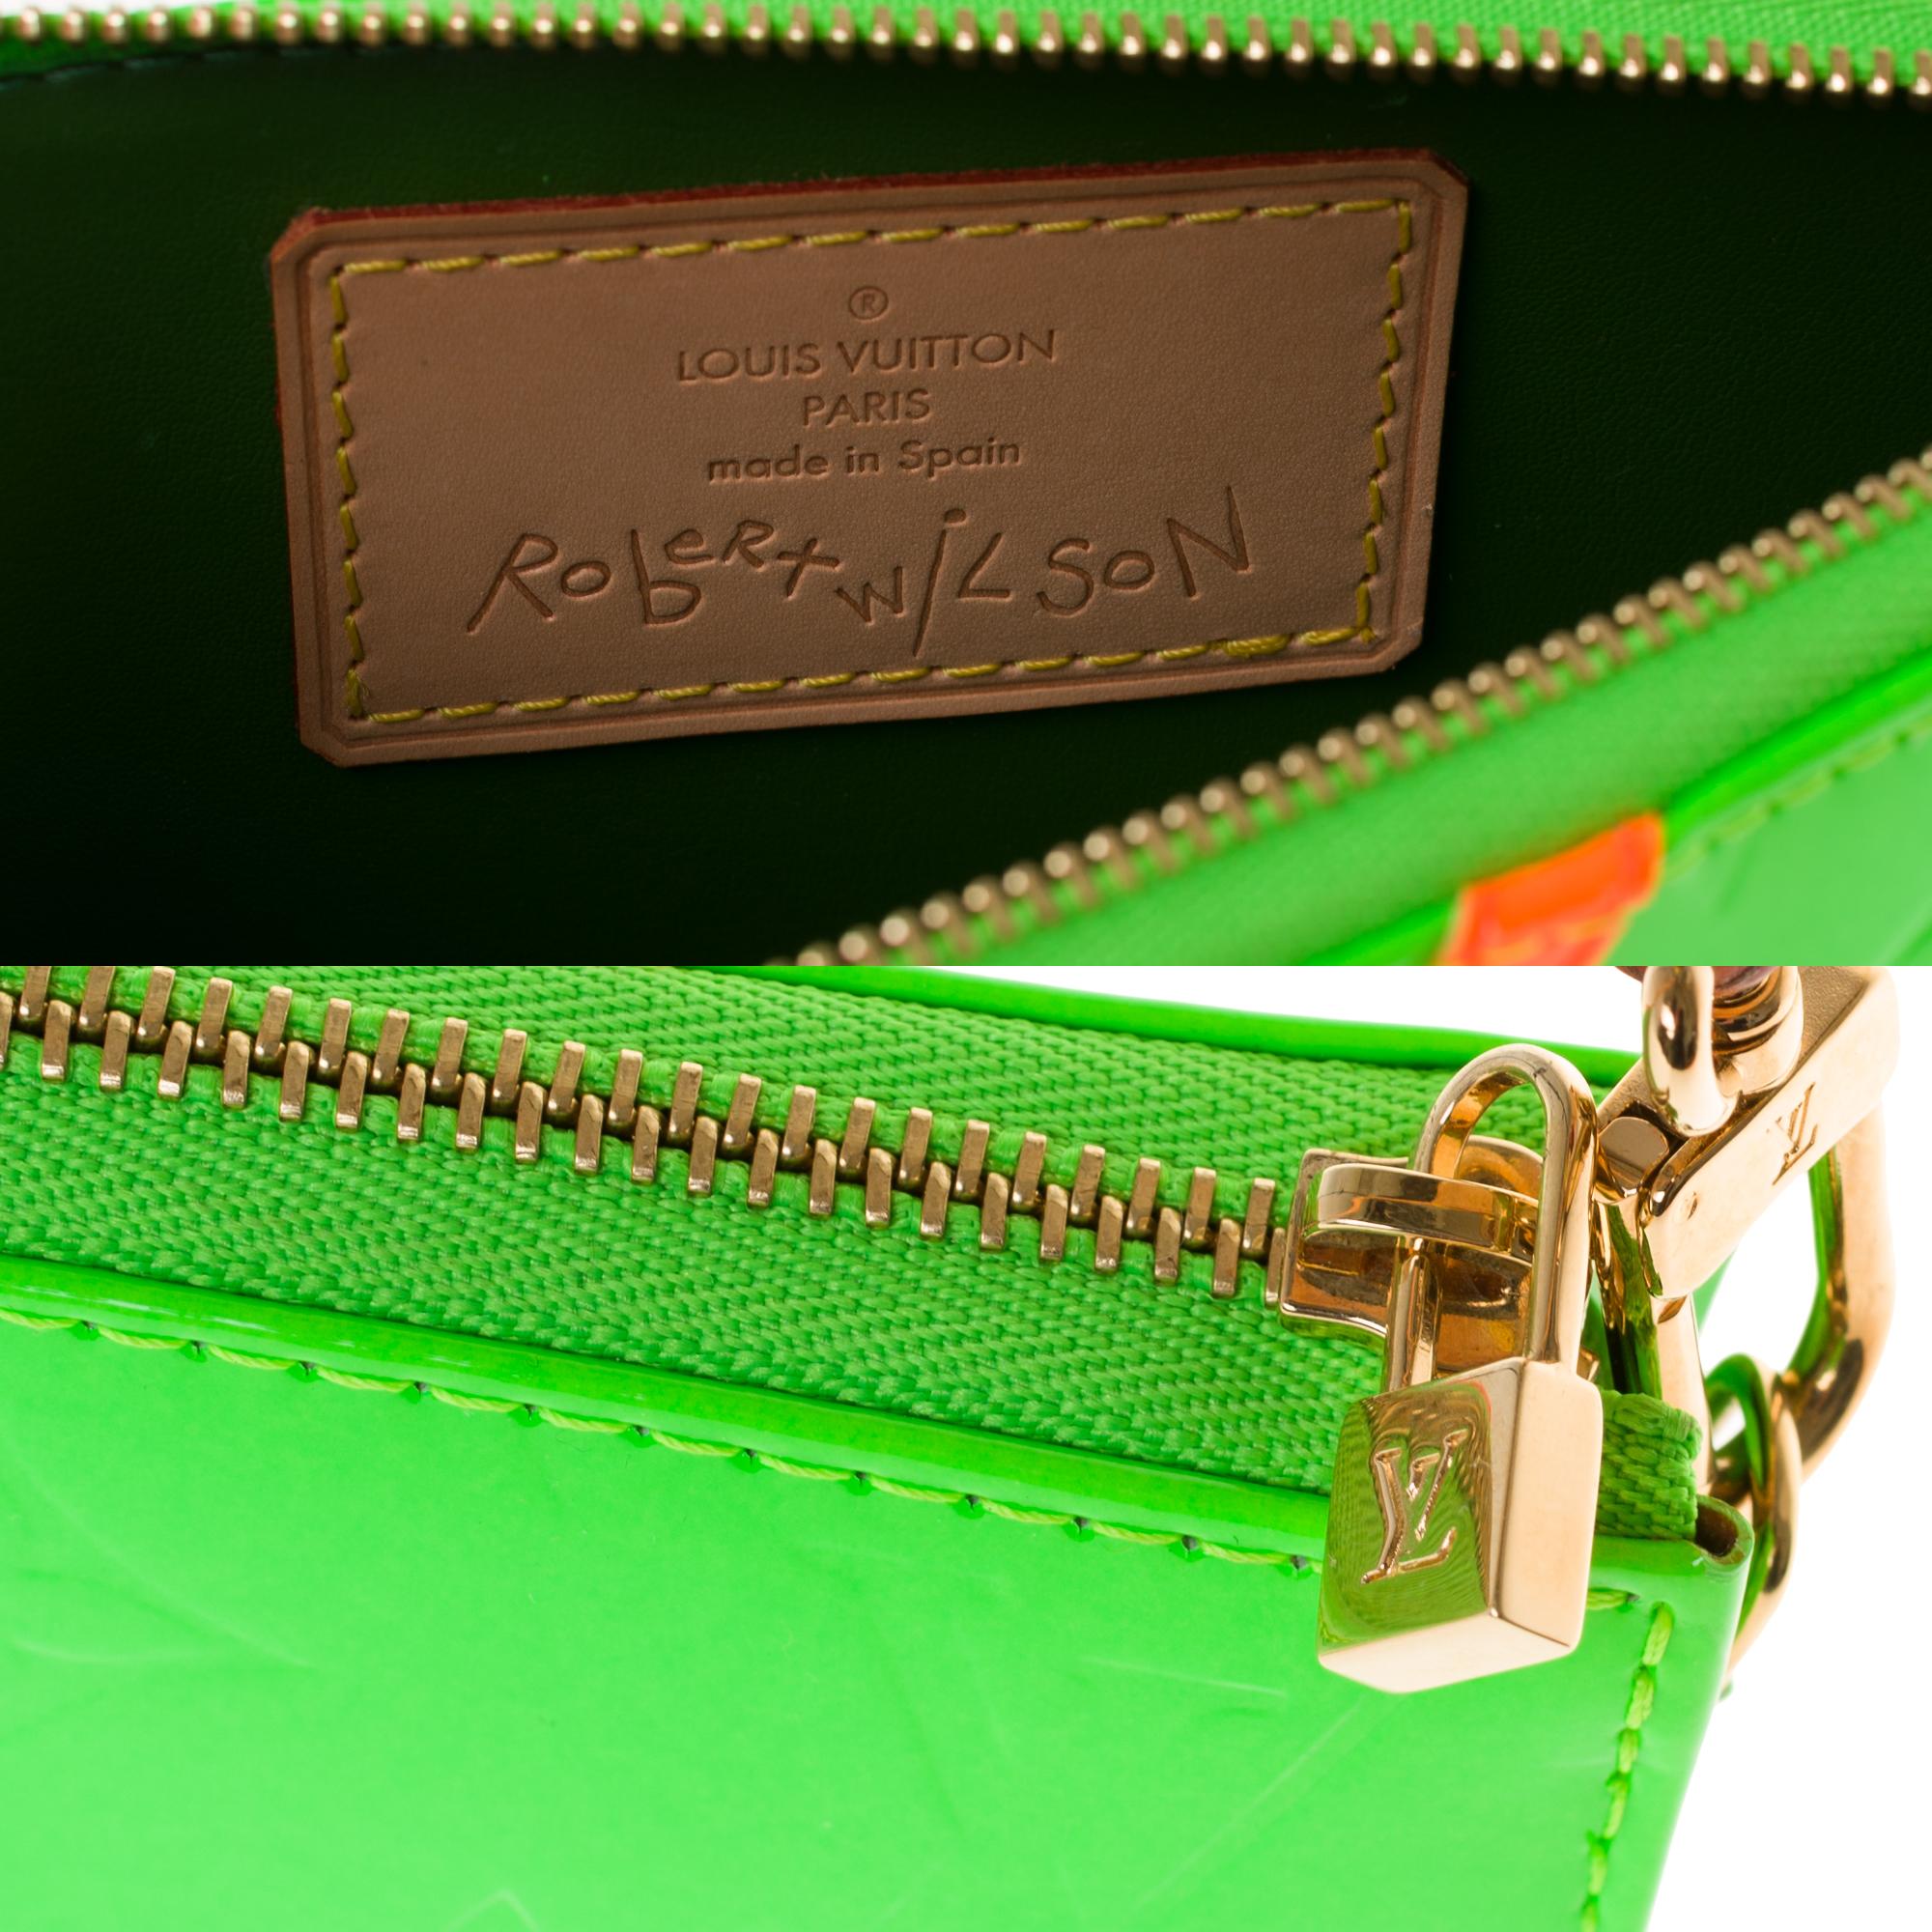 Green Brand New Louis Vuitton Lexington limited edition Pouch in green patent leather